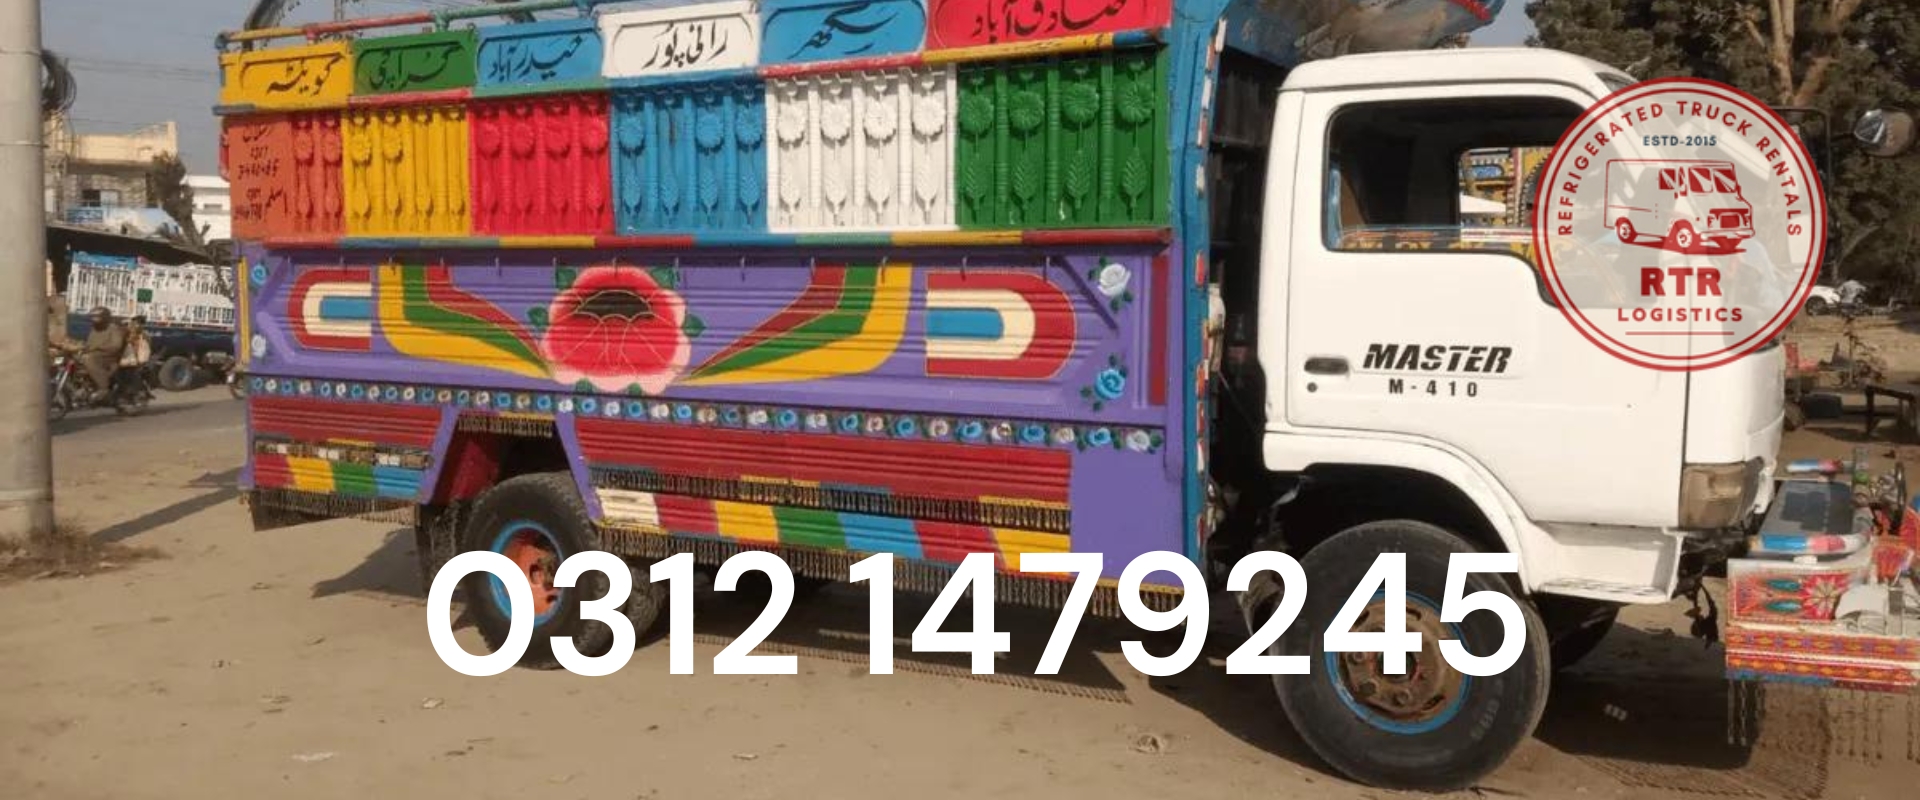 Mazda Container Truck For Rent in Lahore - Rent a Mazda Truck in Lahore